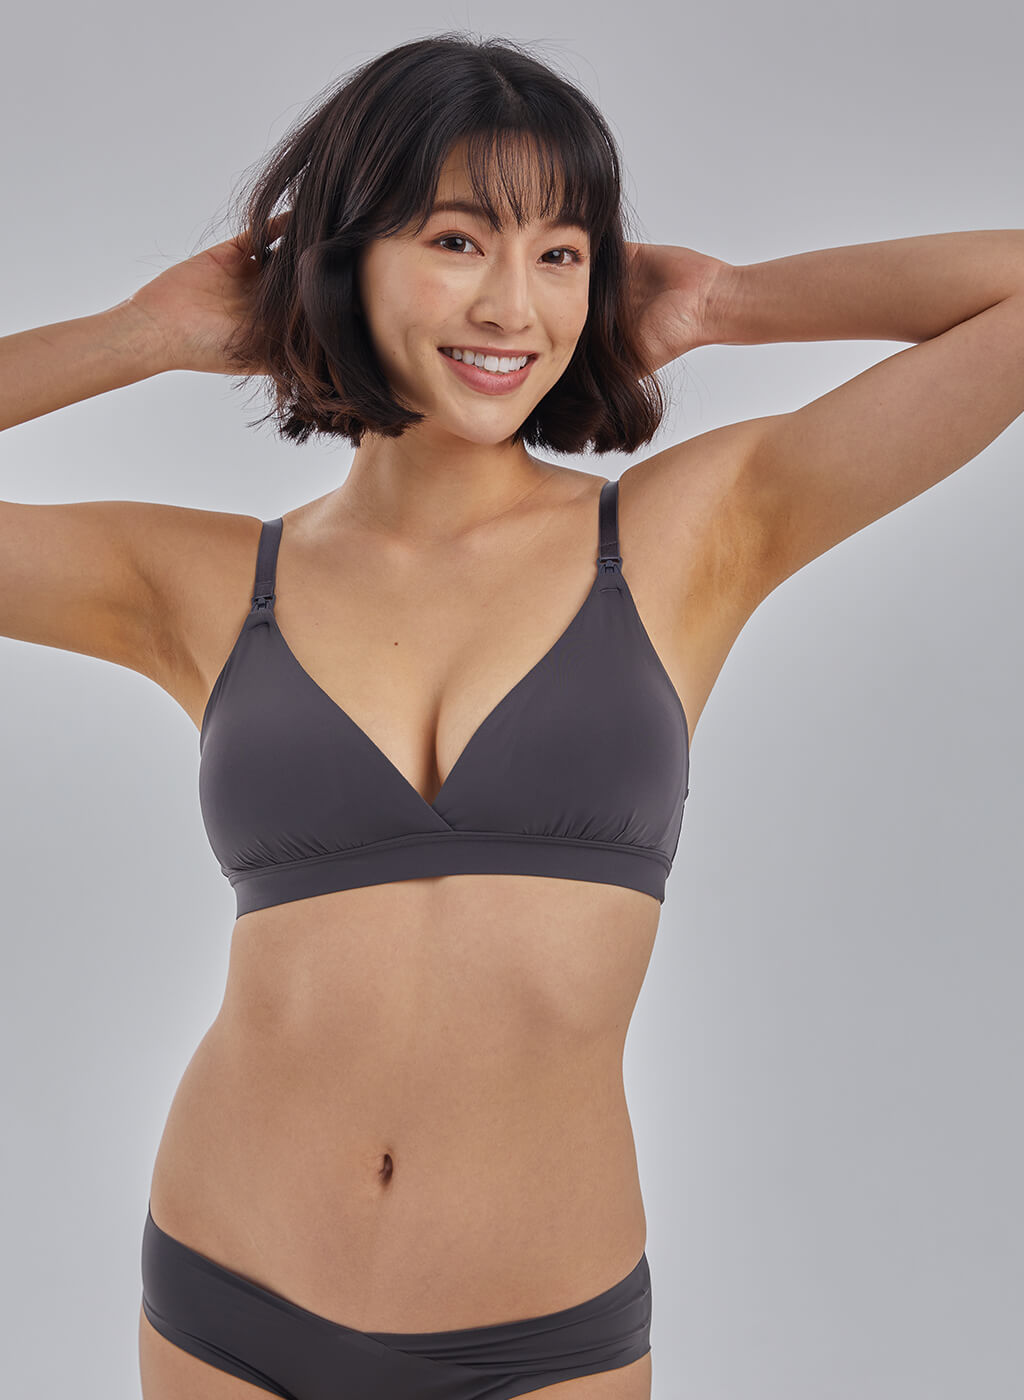 7 Best Maternity and Nursing Bras in Singapore – Lovemere 2022 by Lovemere  - Issuu